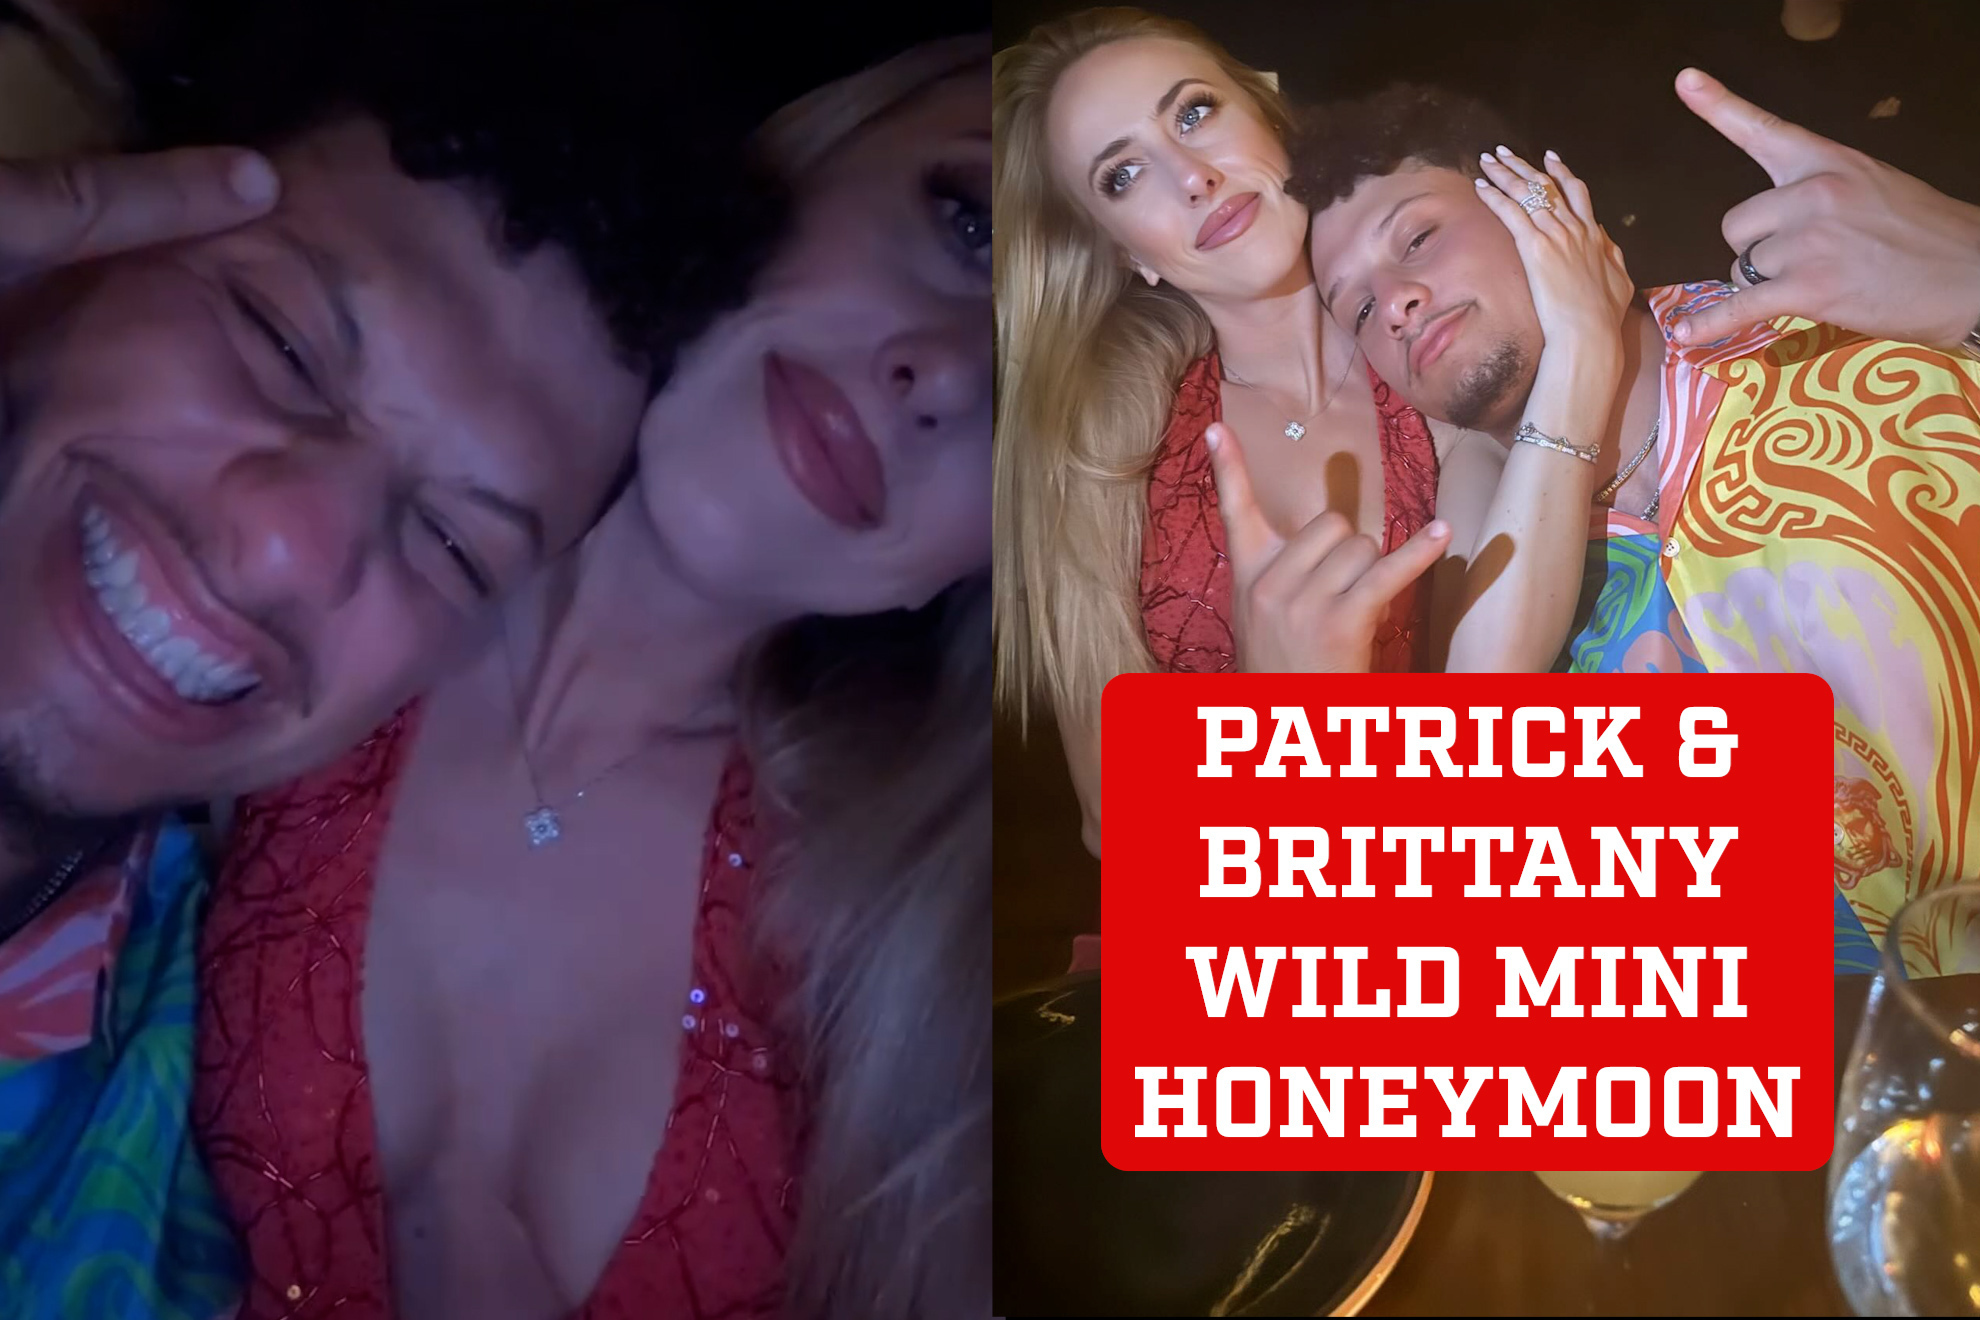 Patrick and Brittany Mahomes on a wild mini honeymoon while celebrating a friends birthday